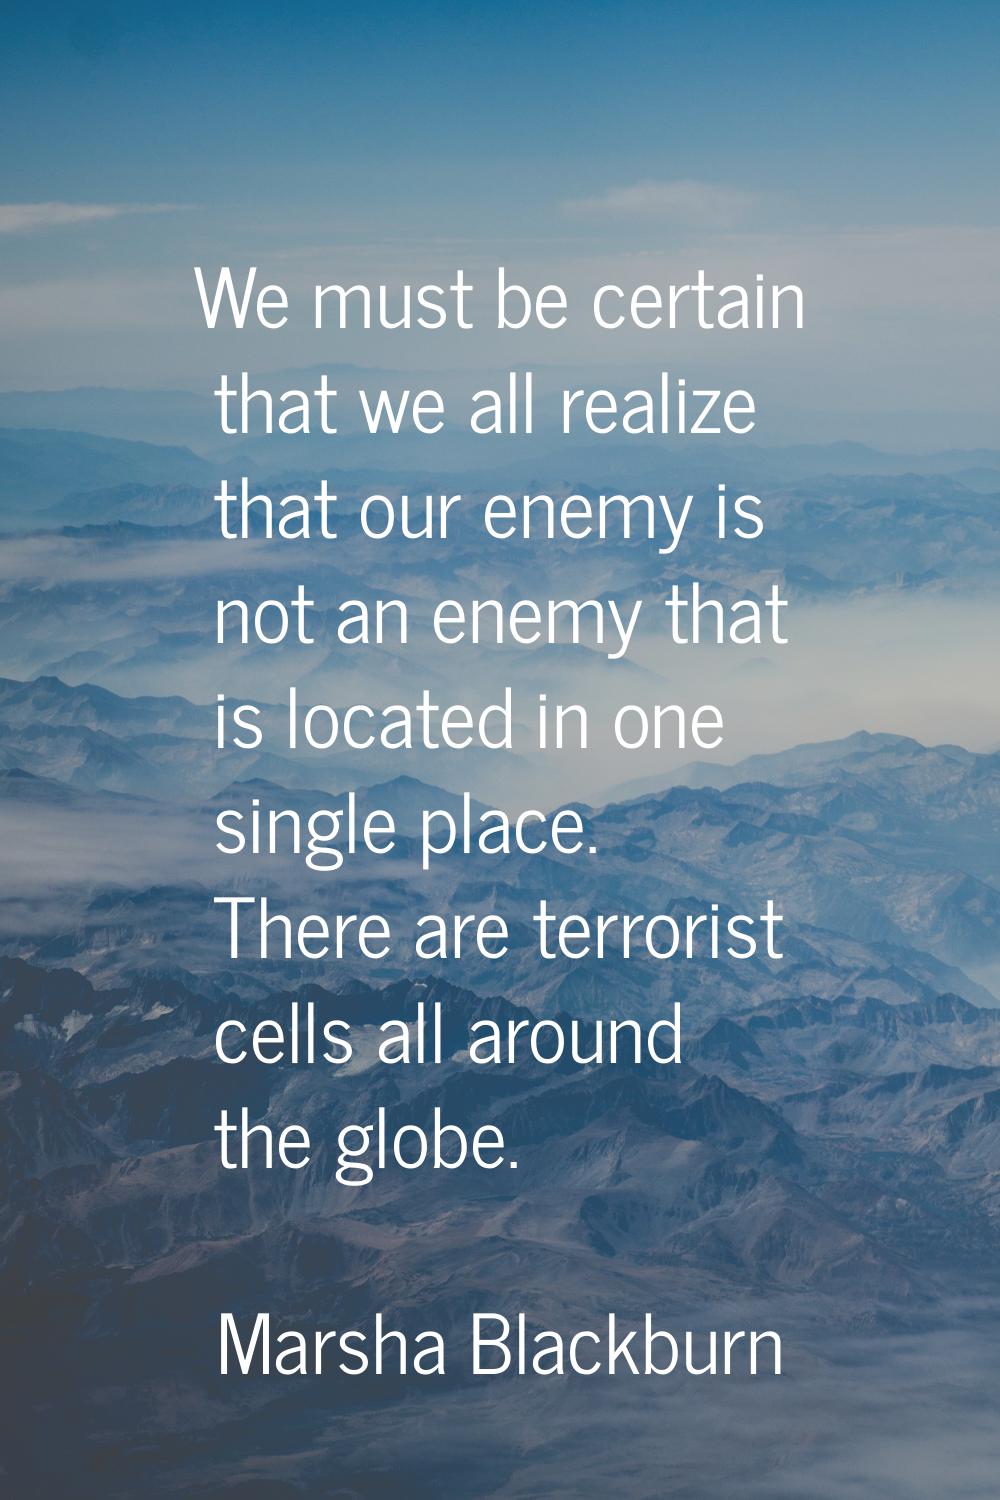 We must be certain that we all realize that our enemy is not an enemy that is located in one single